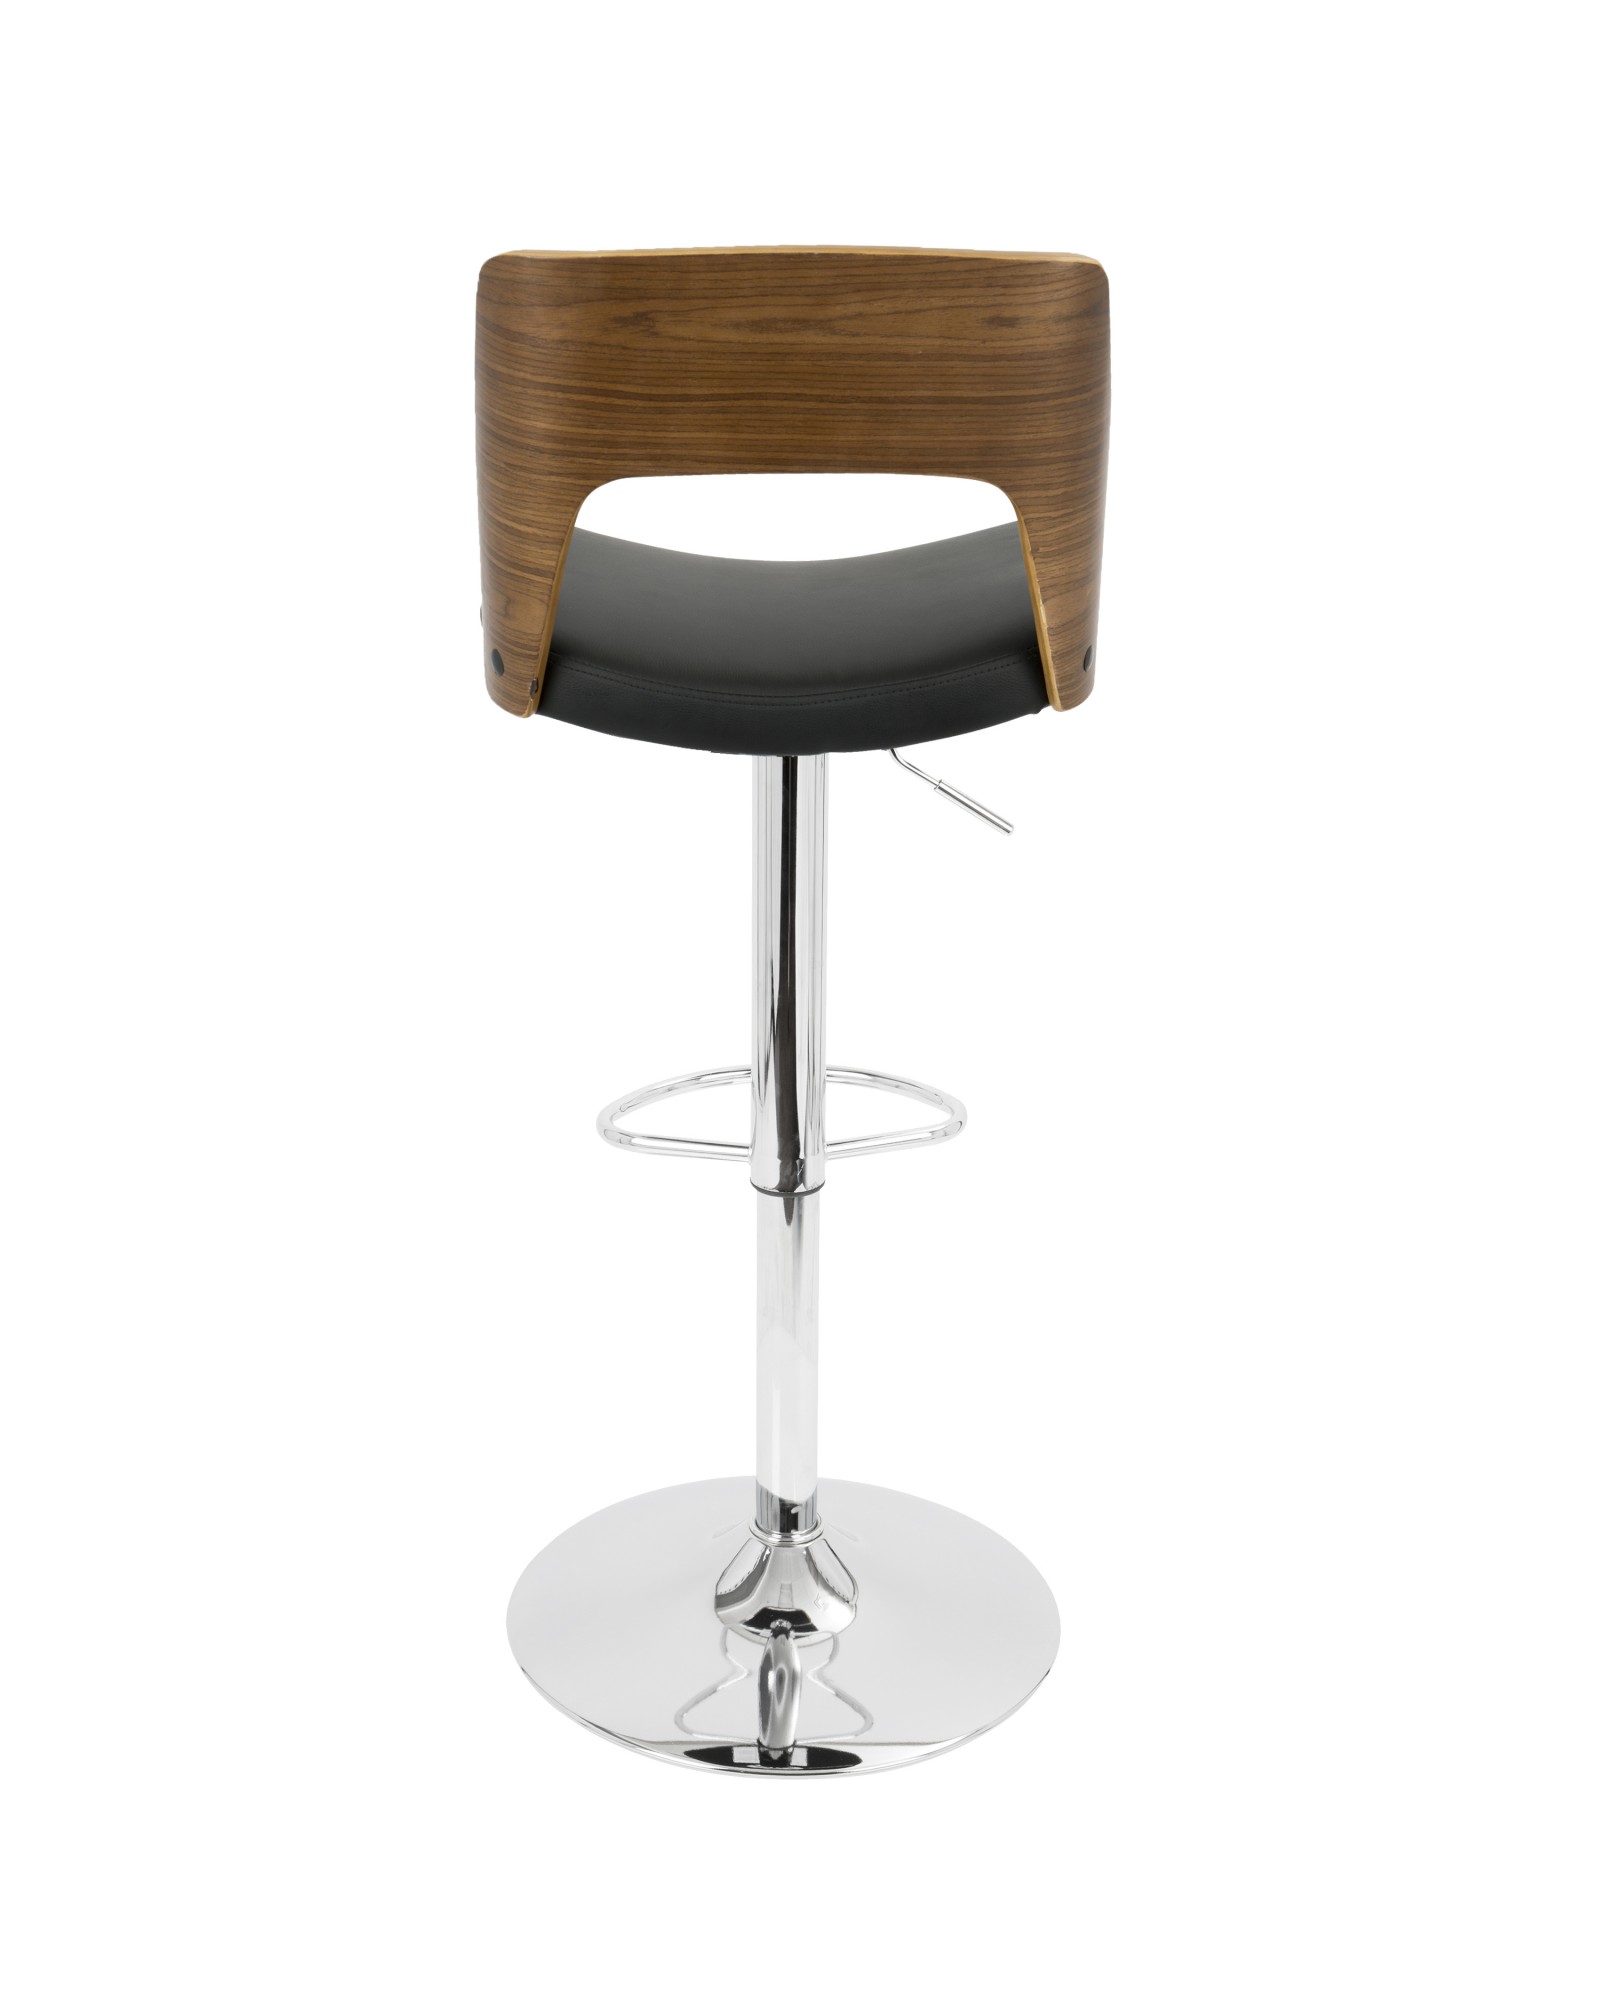 Valencia Mid-Century Modern Adjustable Barstool with Swivel in Walnut and Black Faux Leather